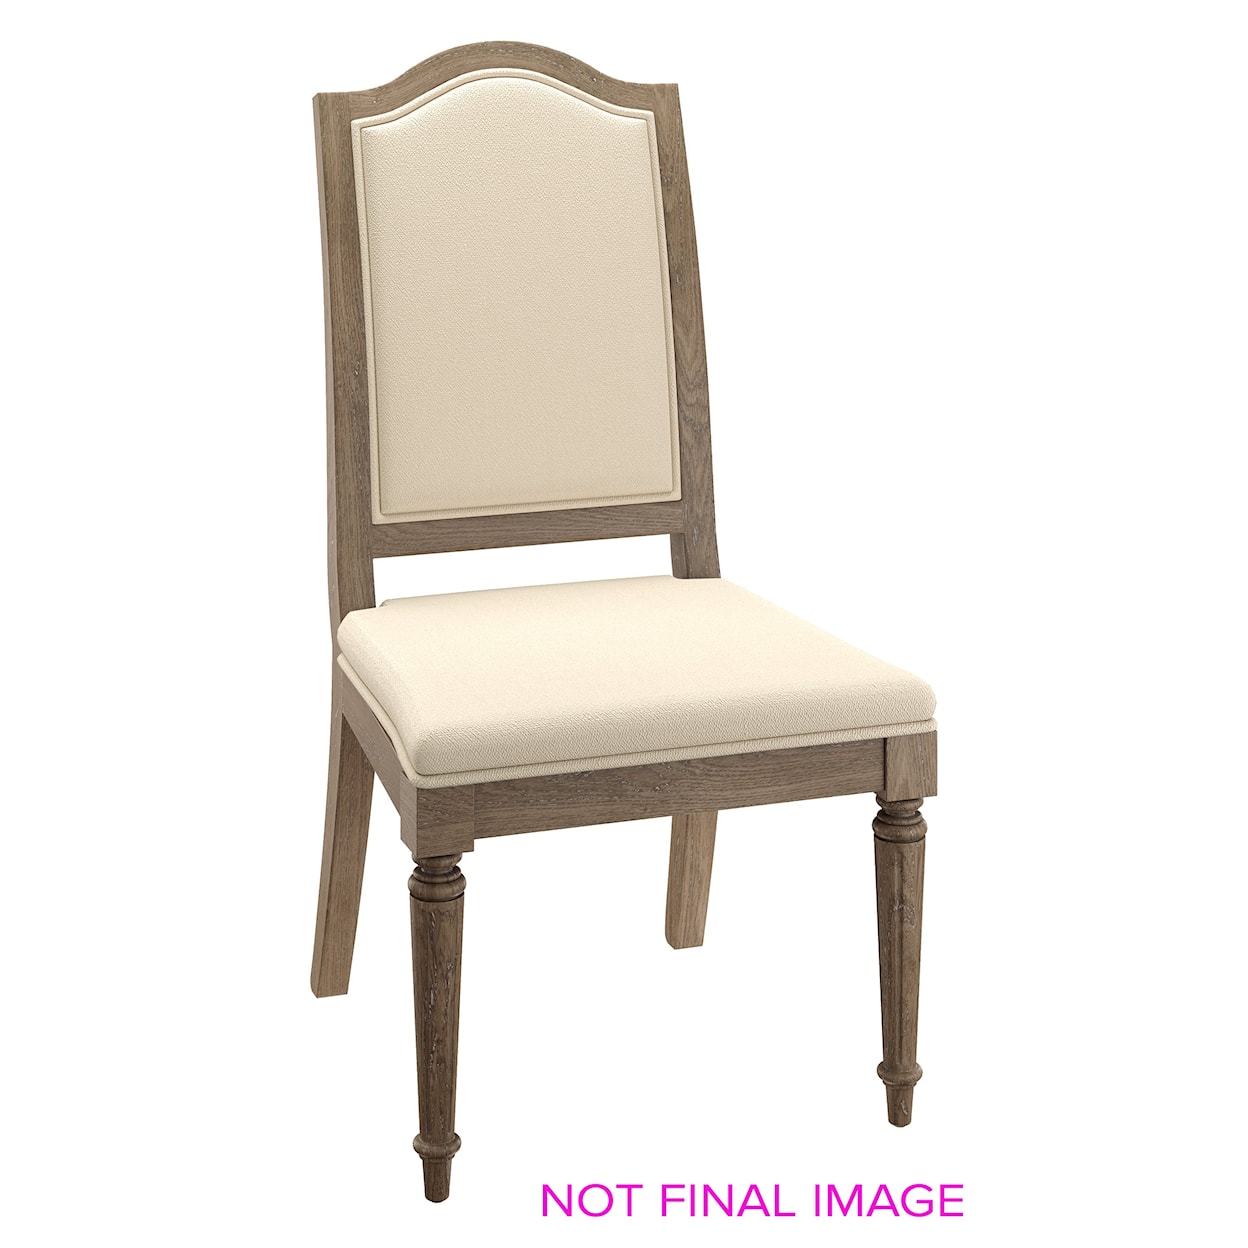 Hekman Chateaux Side Chair